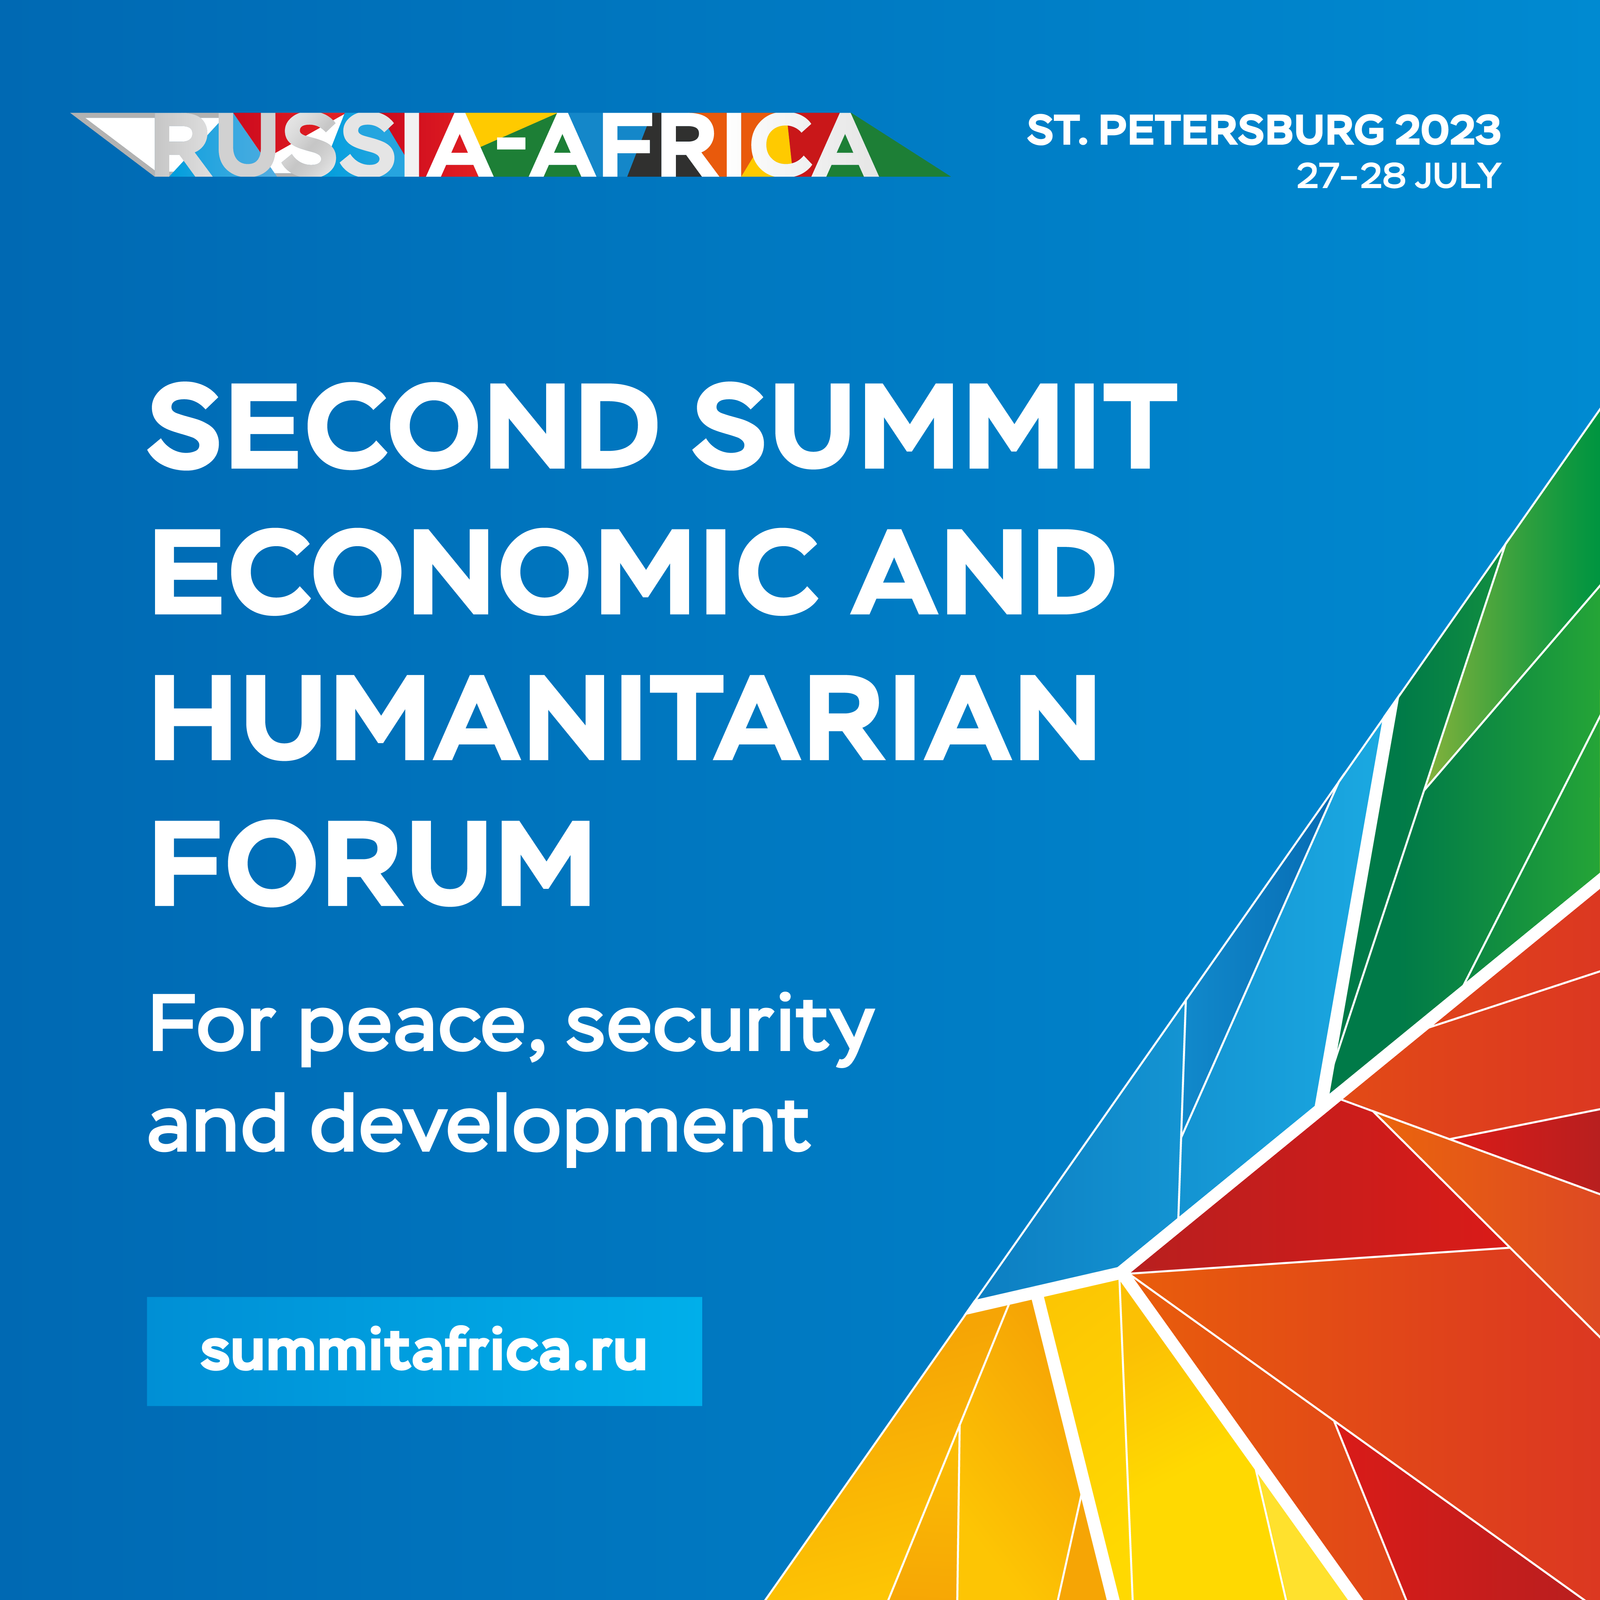 You are currently viewing Russia-Africa Second Summit